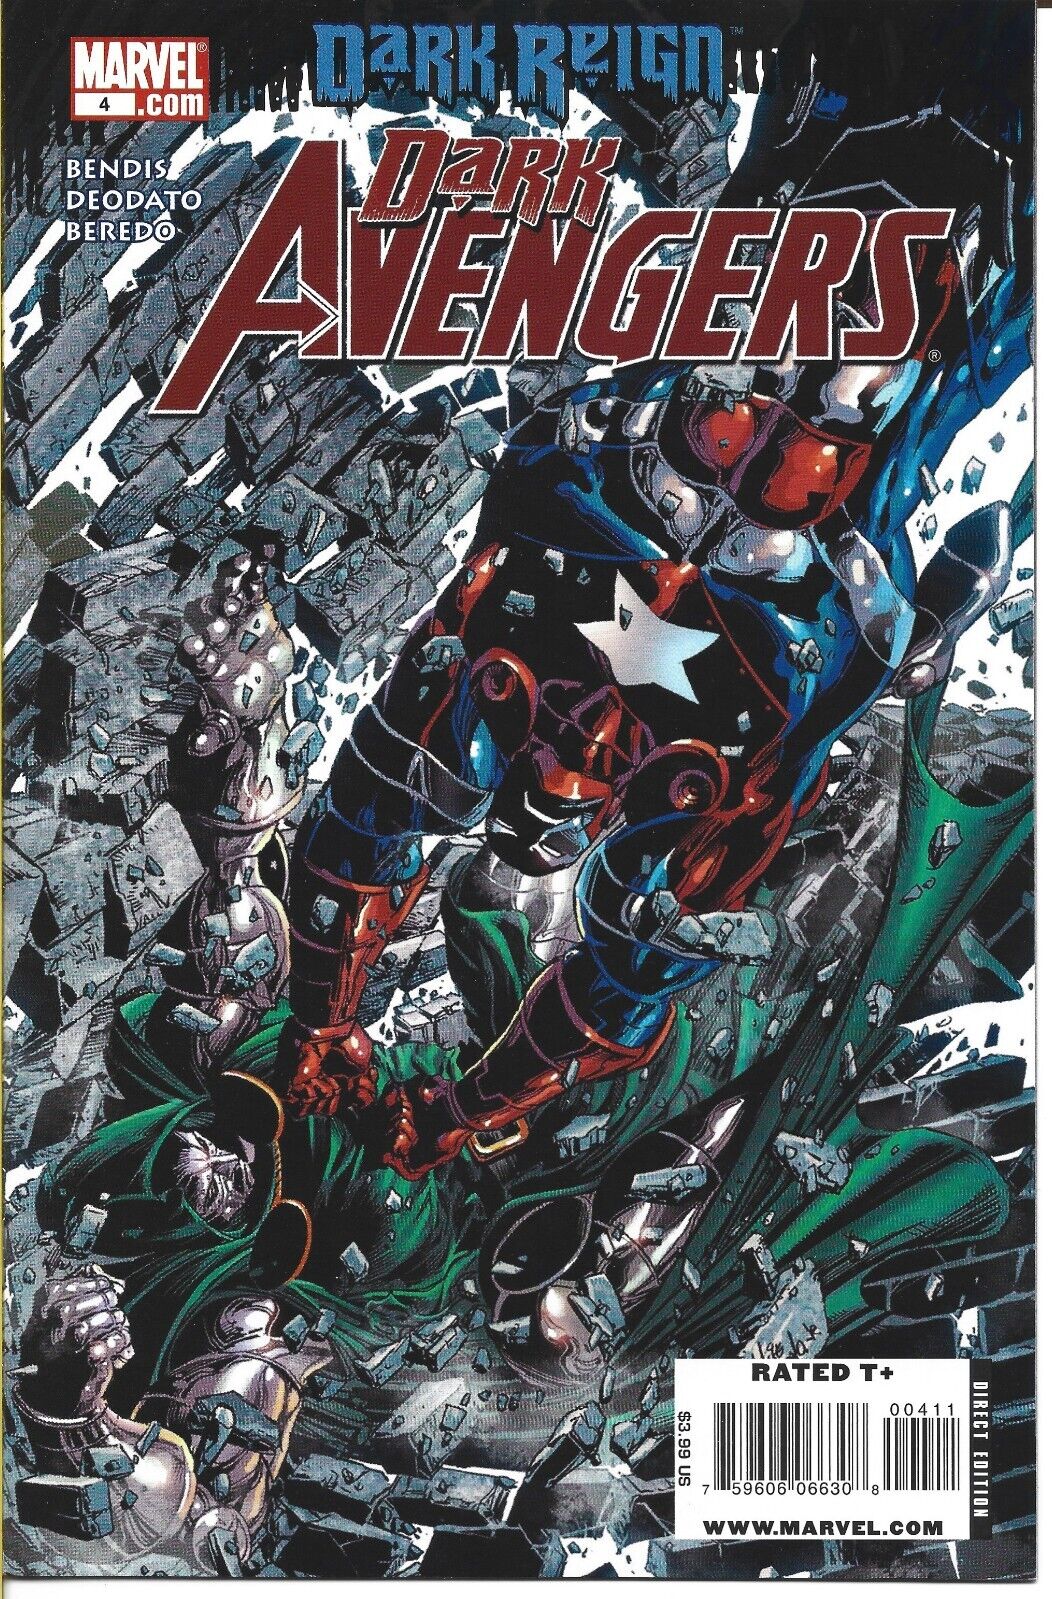 DARK AVENGERS #4 MARVEL COMICS 2009 BAGGED AND BOARDED